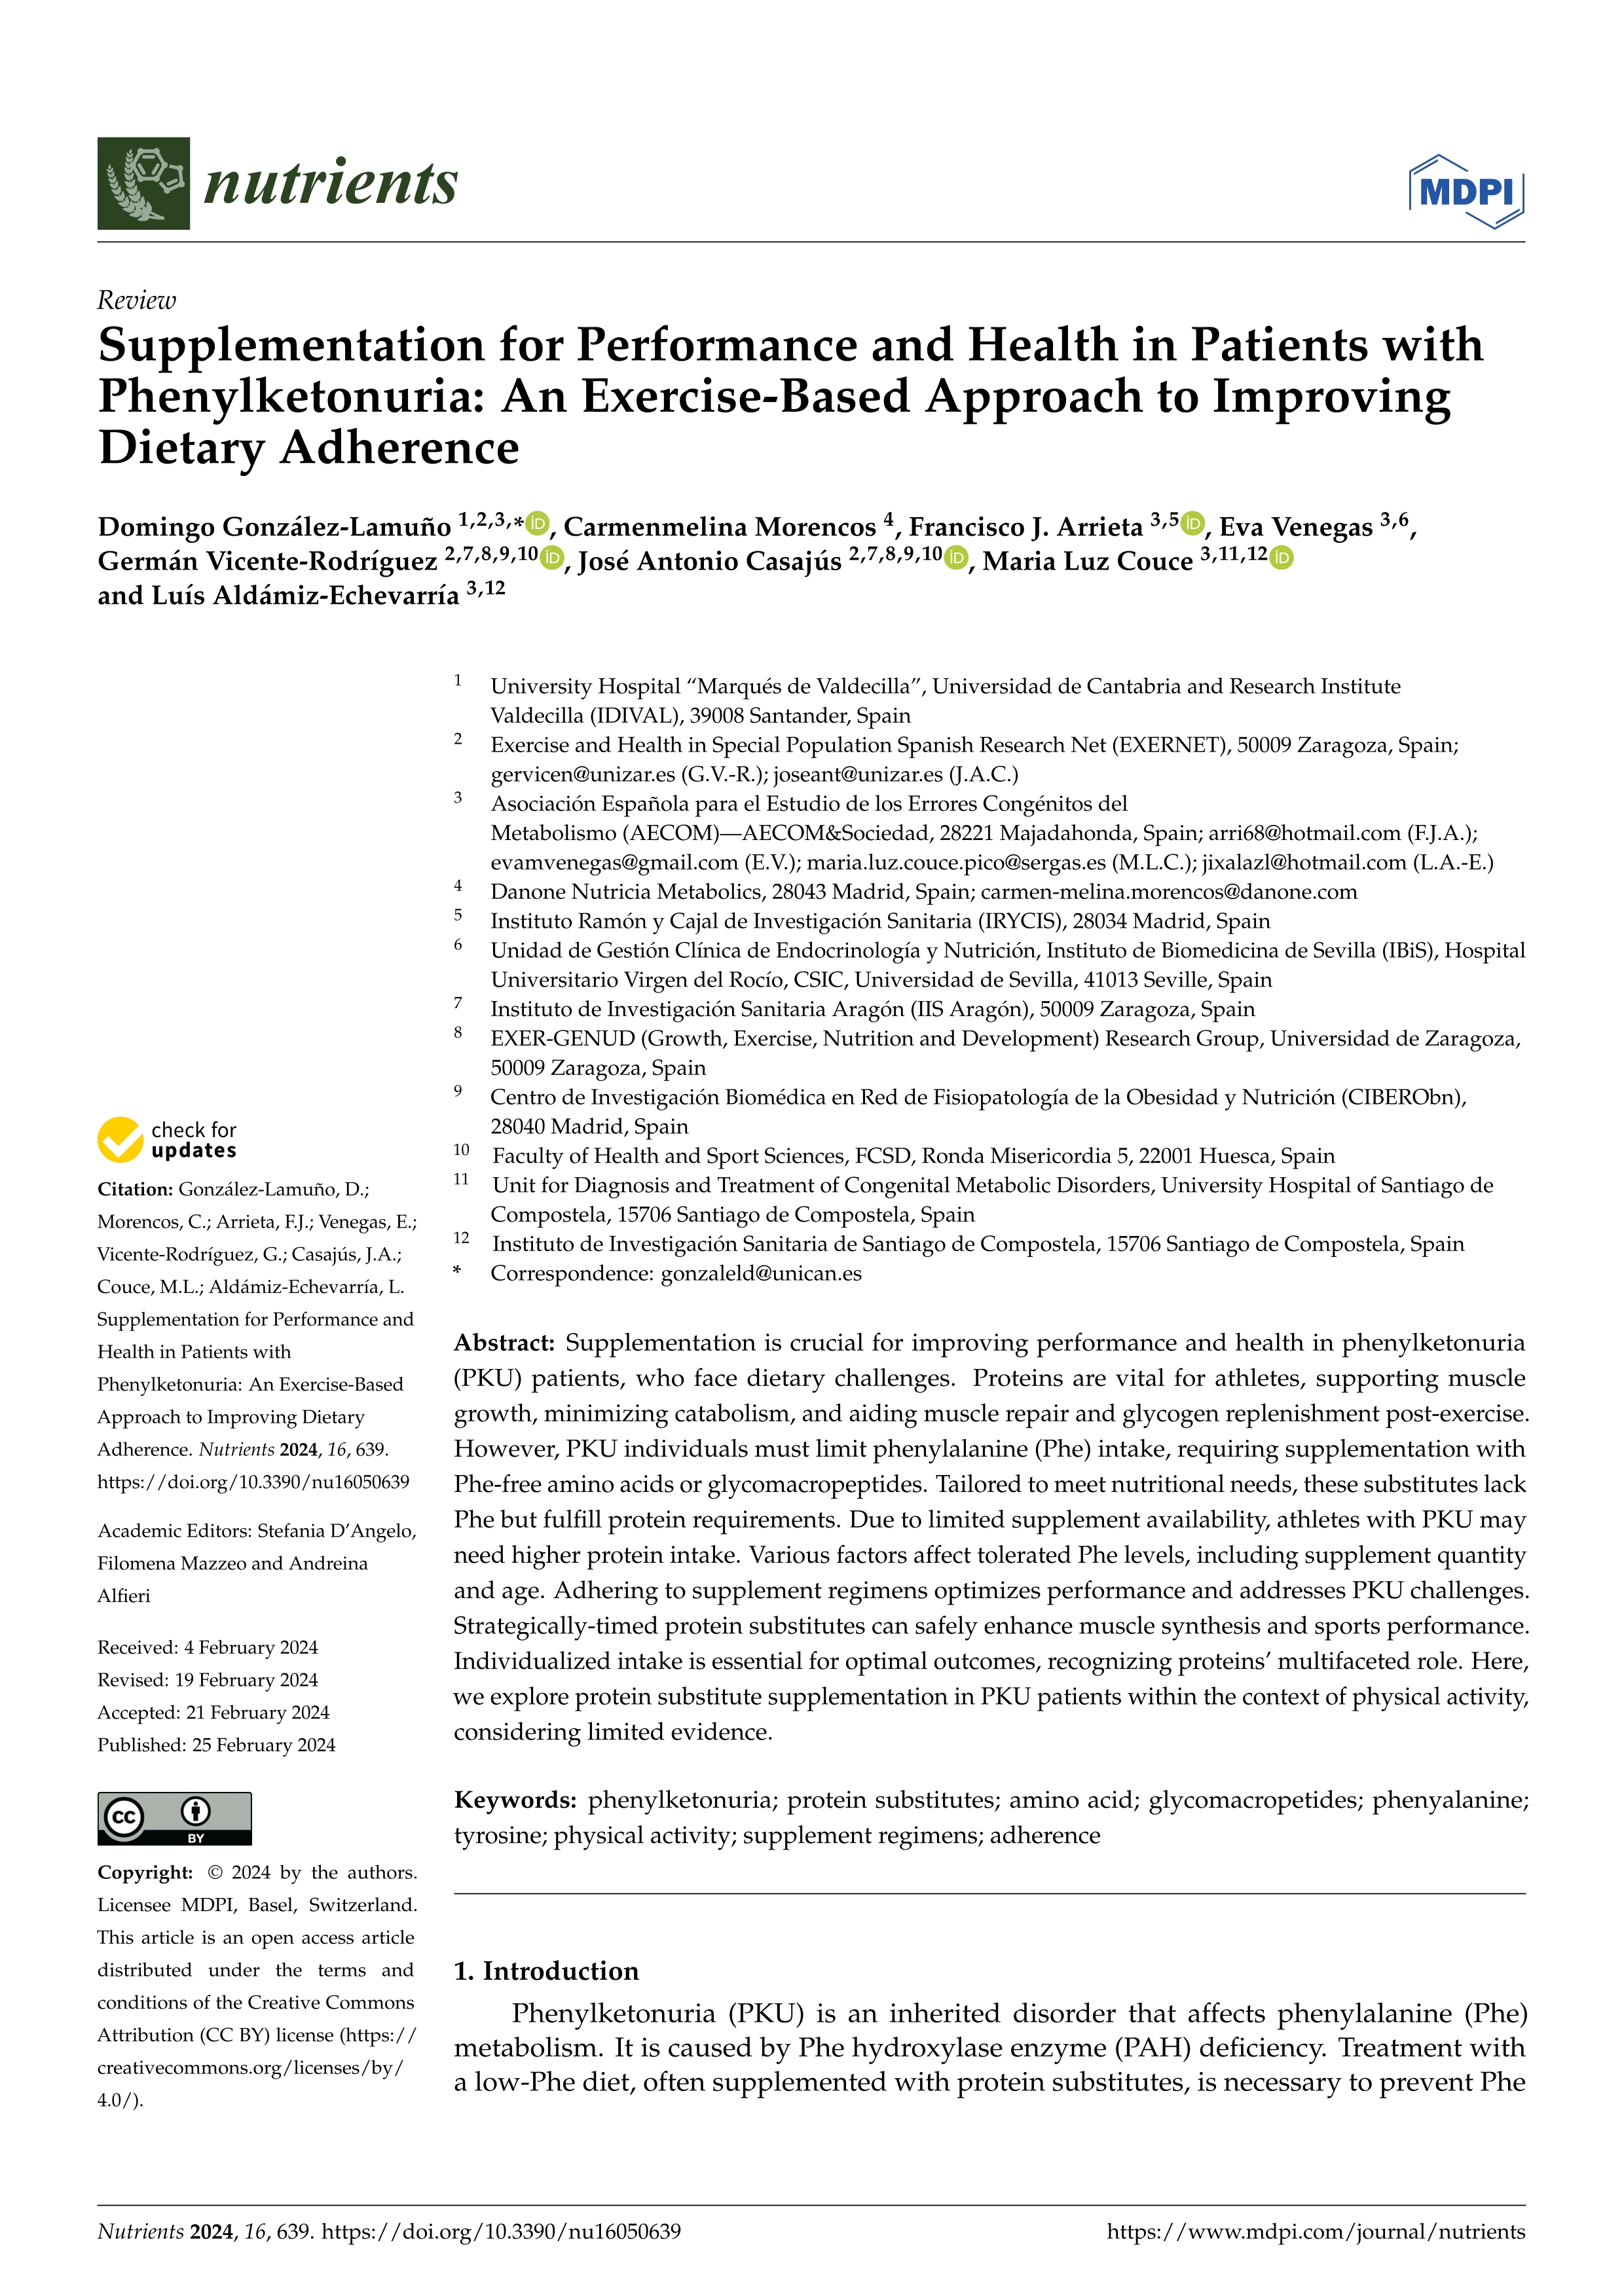 Supplementation for Performance and Health in Patients with Phenylketonuria: An Exercise-Based Approach to Improving Dietary Adherence